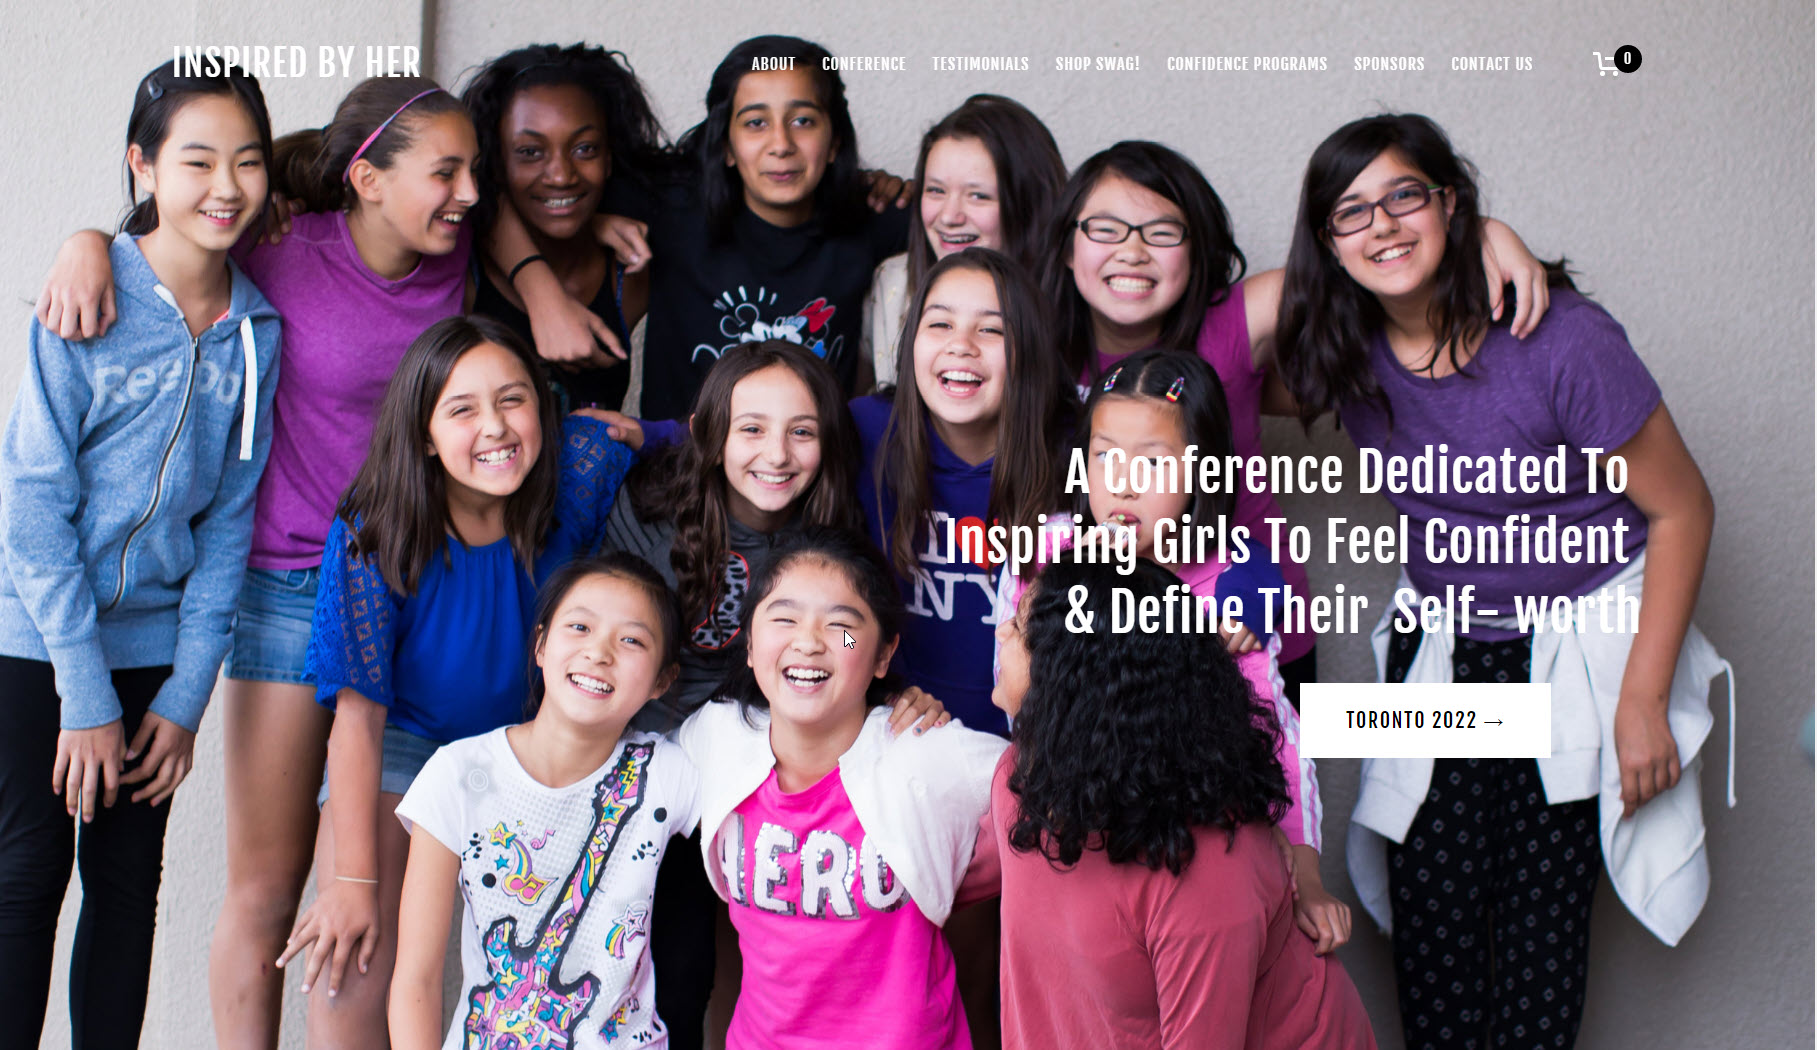 Inspired by Her Conference Hero Image - roughly twenty girls ages 8-14 posing for a group photo